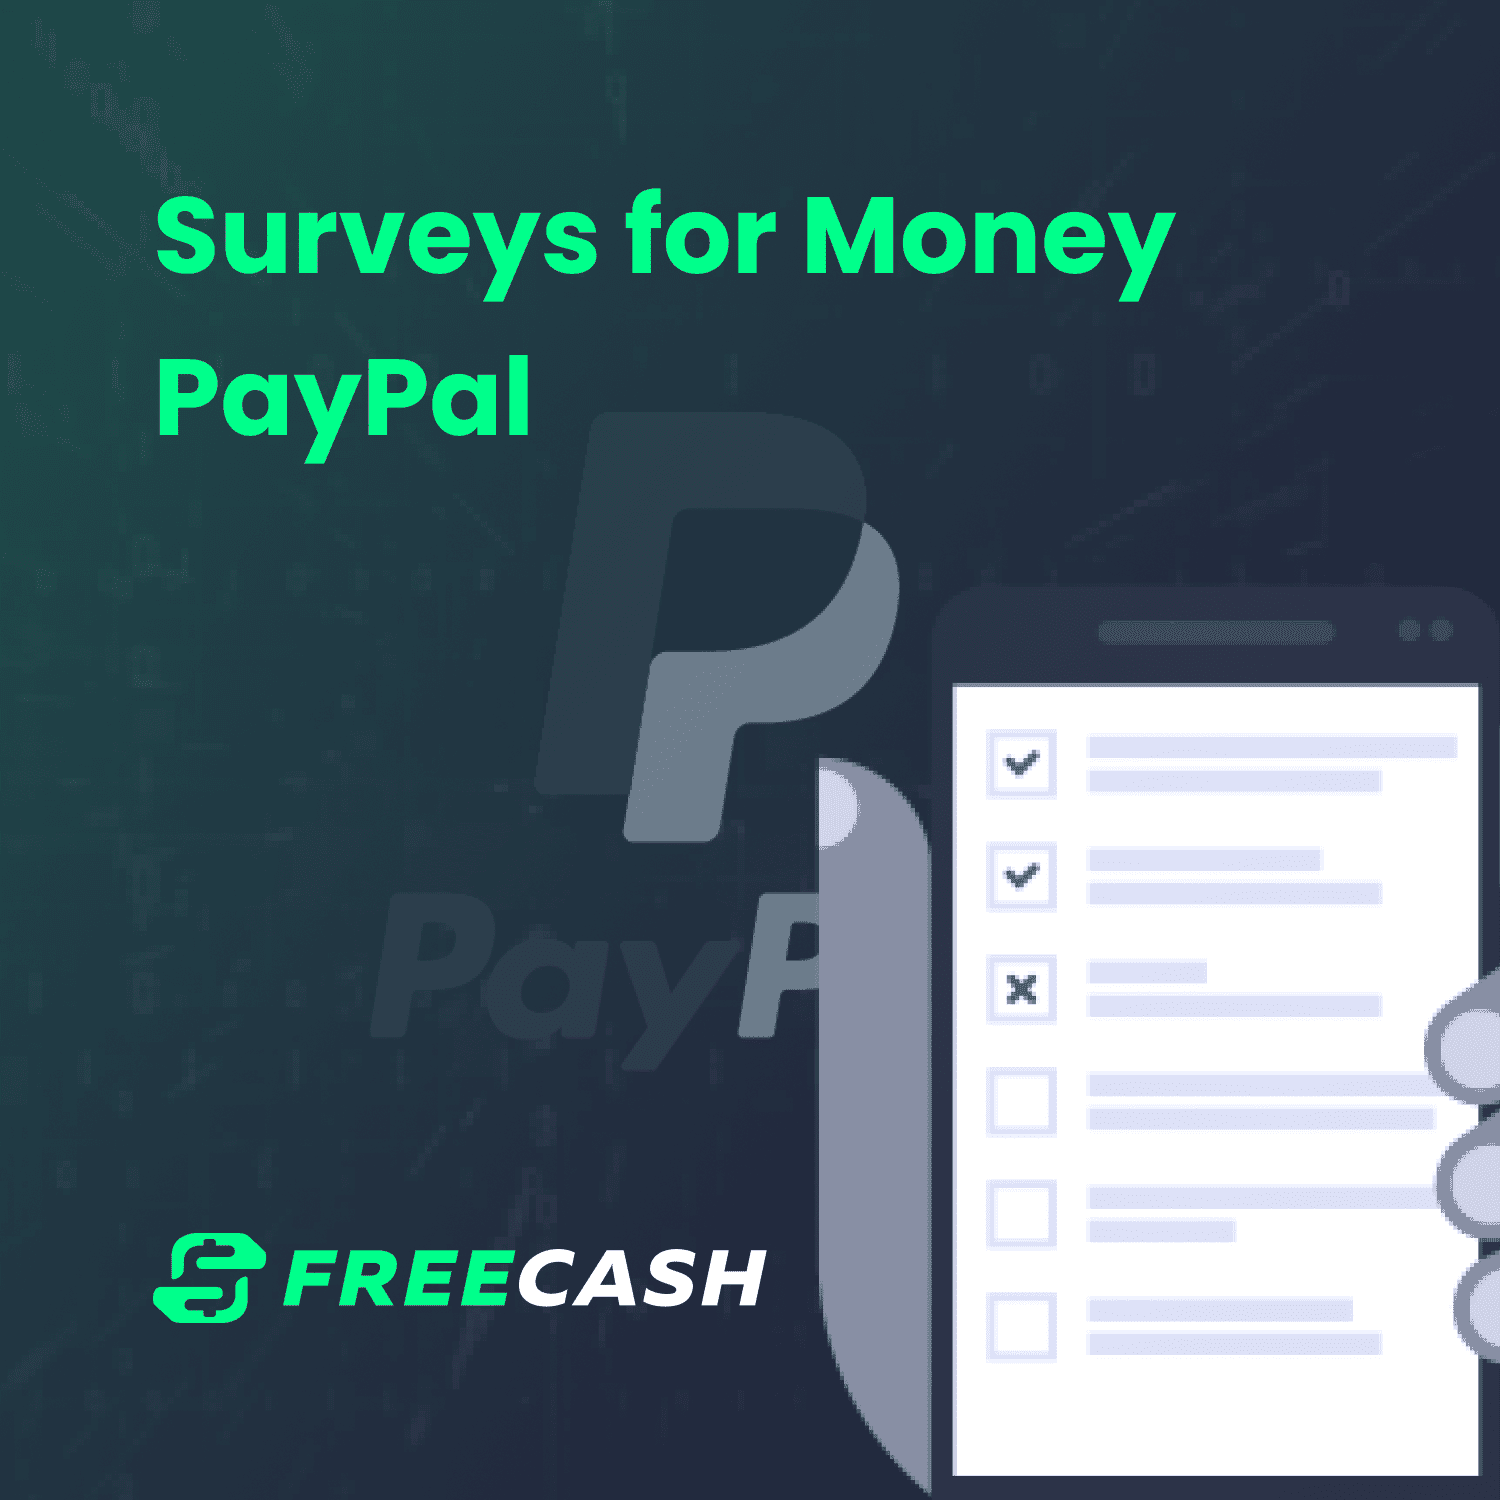 Survey Your Way to PayPal Money: A Step-by-Step Guide